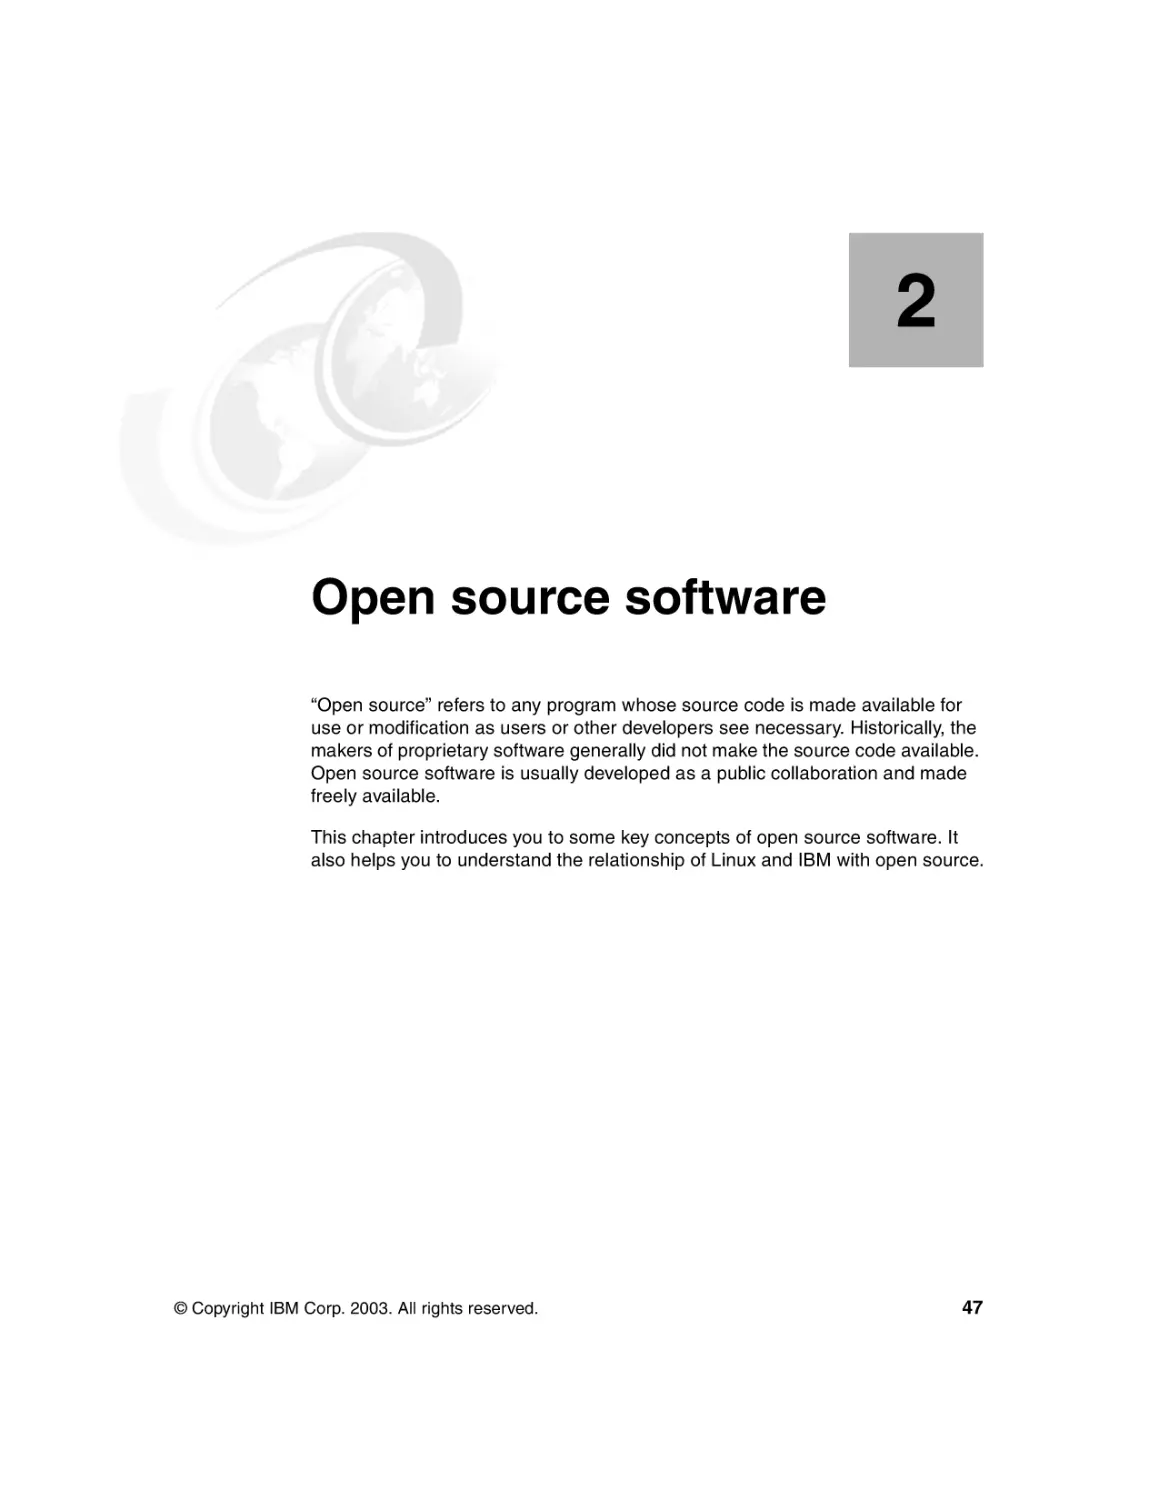 Chapter 2. Open source software